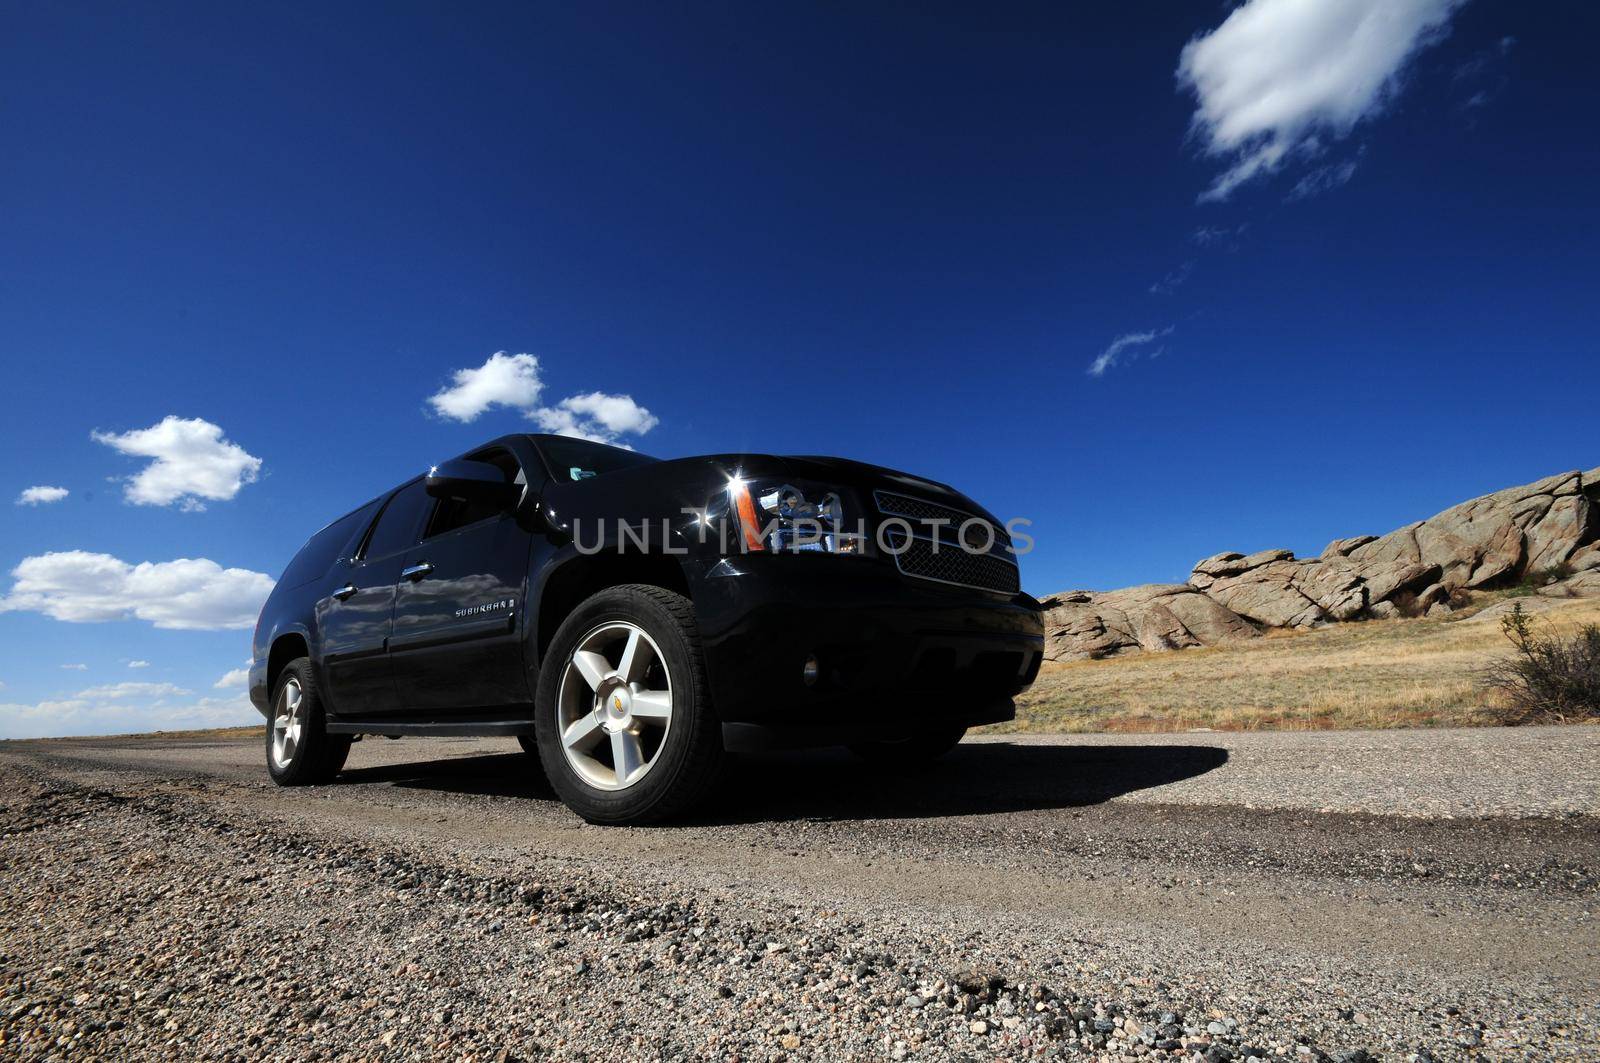 Large Black SUV on the Colorado Road. Wide Angle Photo. Summer Time in Colorado by welcomia